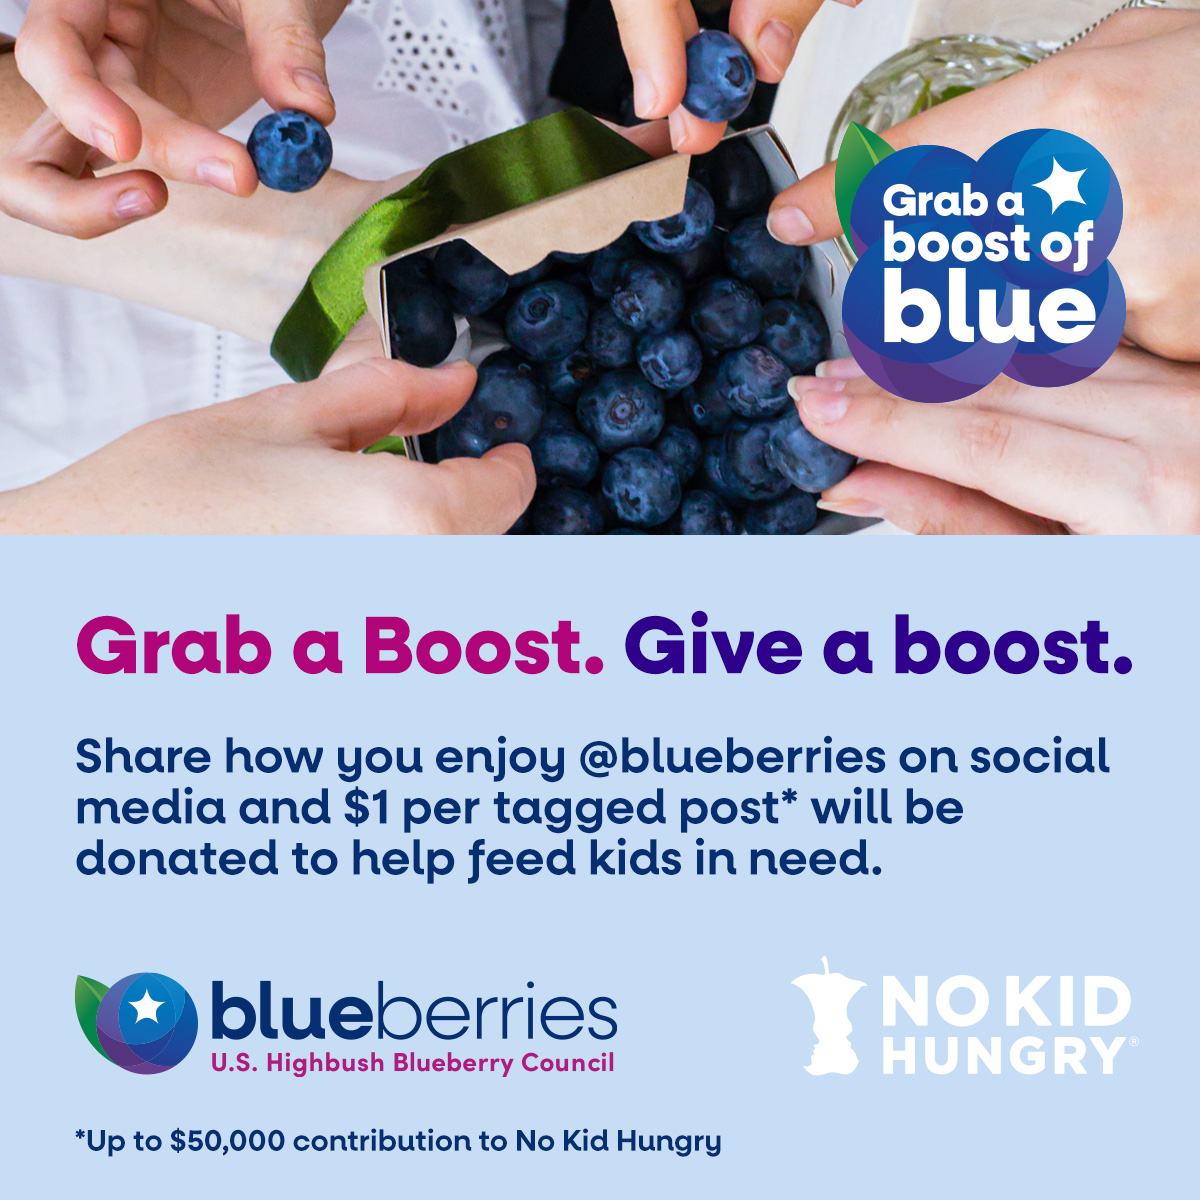 Each tagged post on Instagram, Facebook, Twitter (@blueberries), and TikTok (@blueberrycouncil) this July, will help raise up to $50K, which can help provide 500,000 meals for kids around the country.